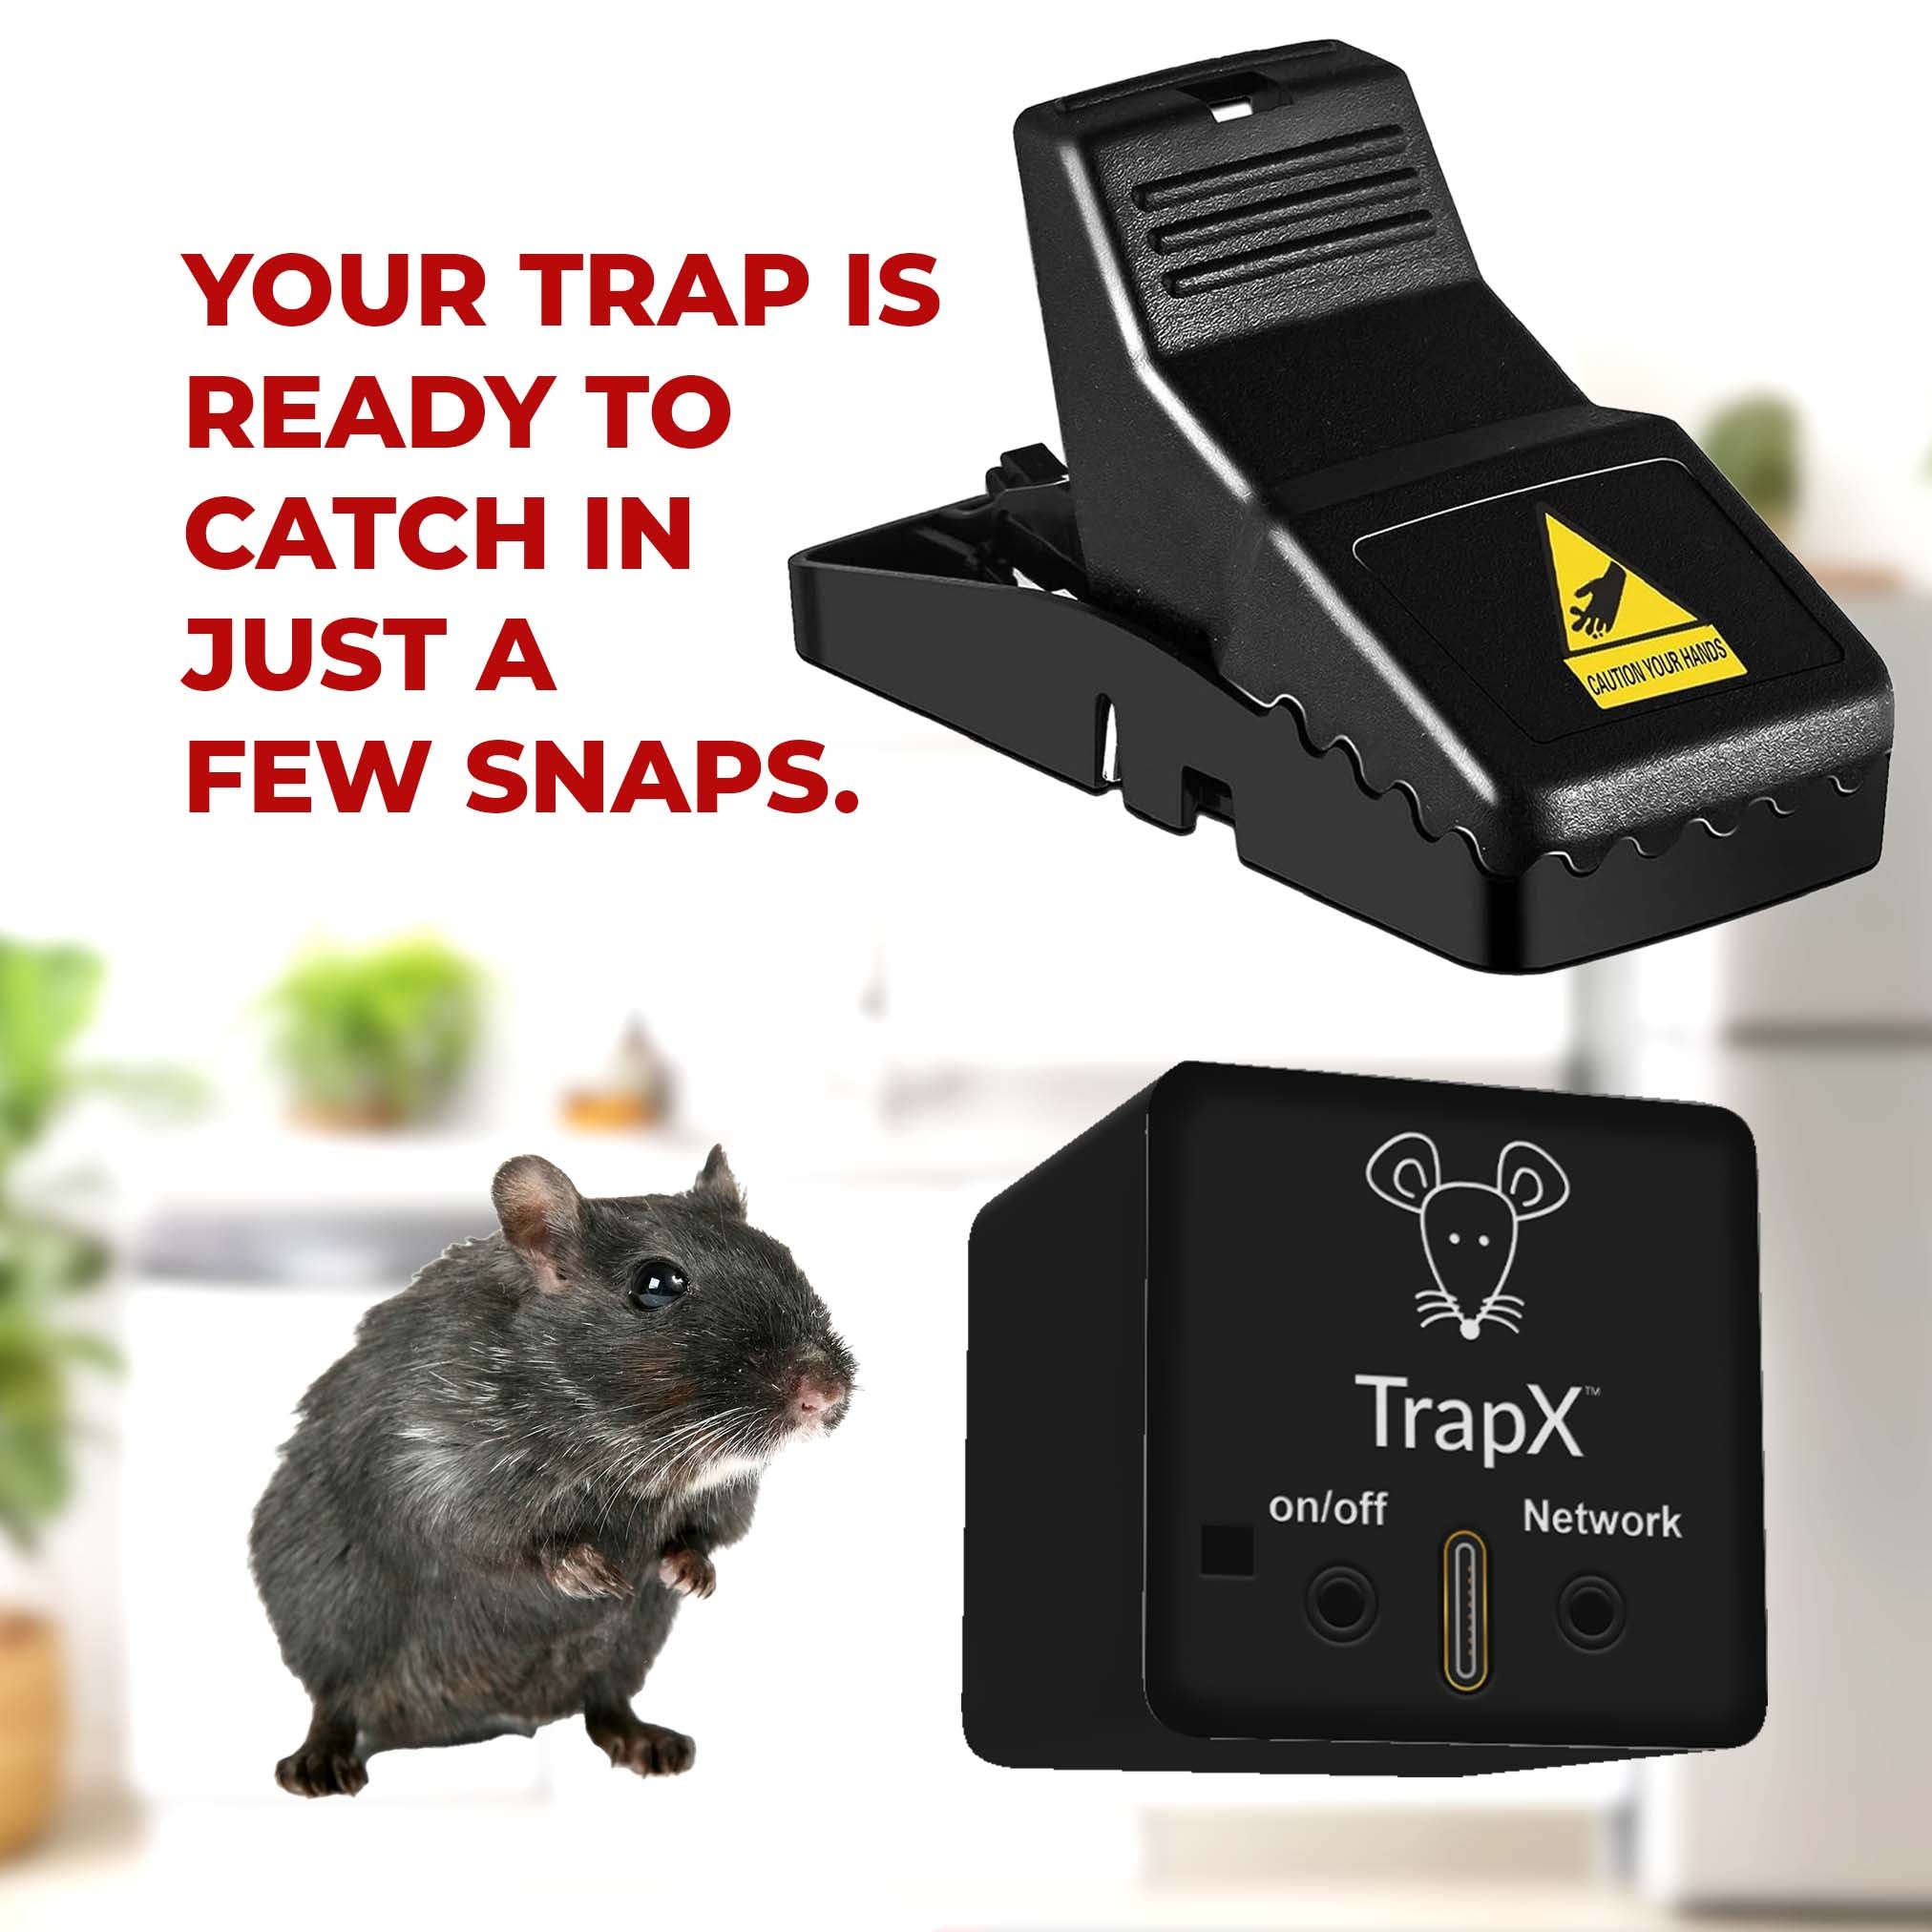 Why should I choose TrapX for my organization?